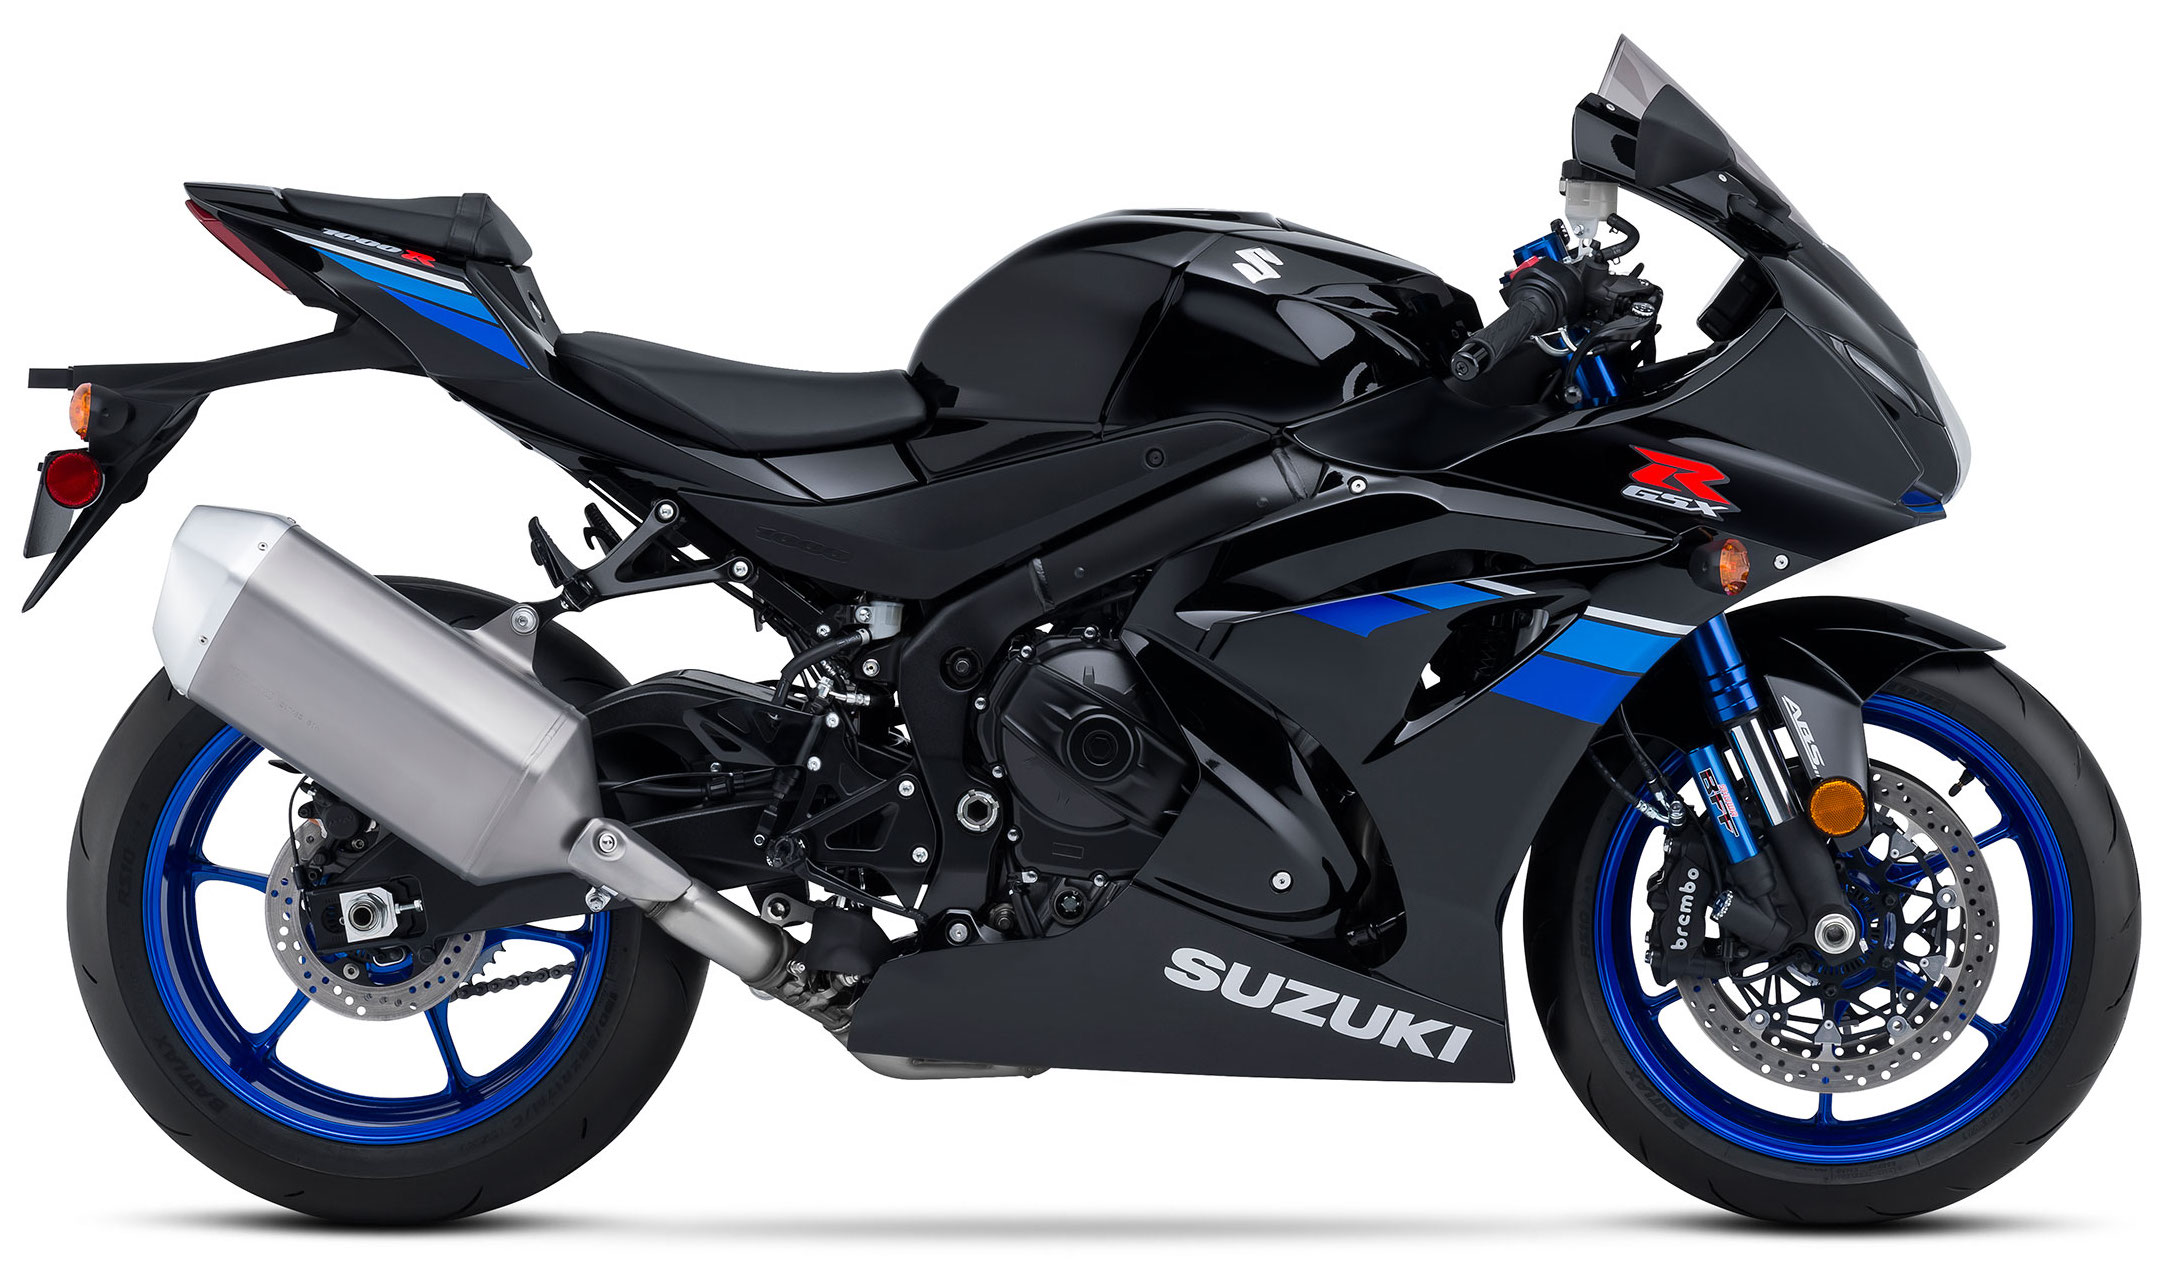 2017 Suzuki GSX-R 1000 and GSX-R 1000R L7 UK prices confirmed - from ...